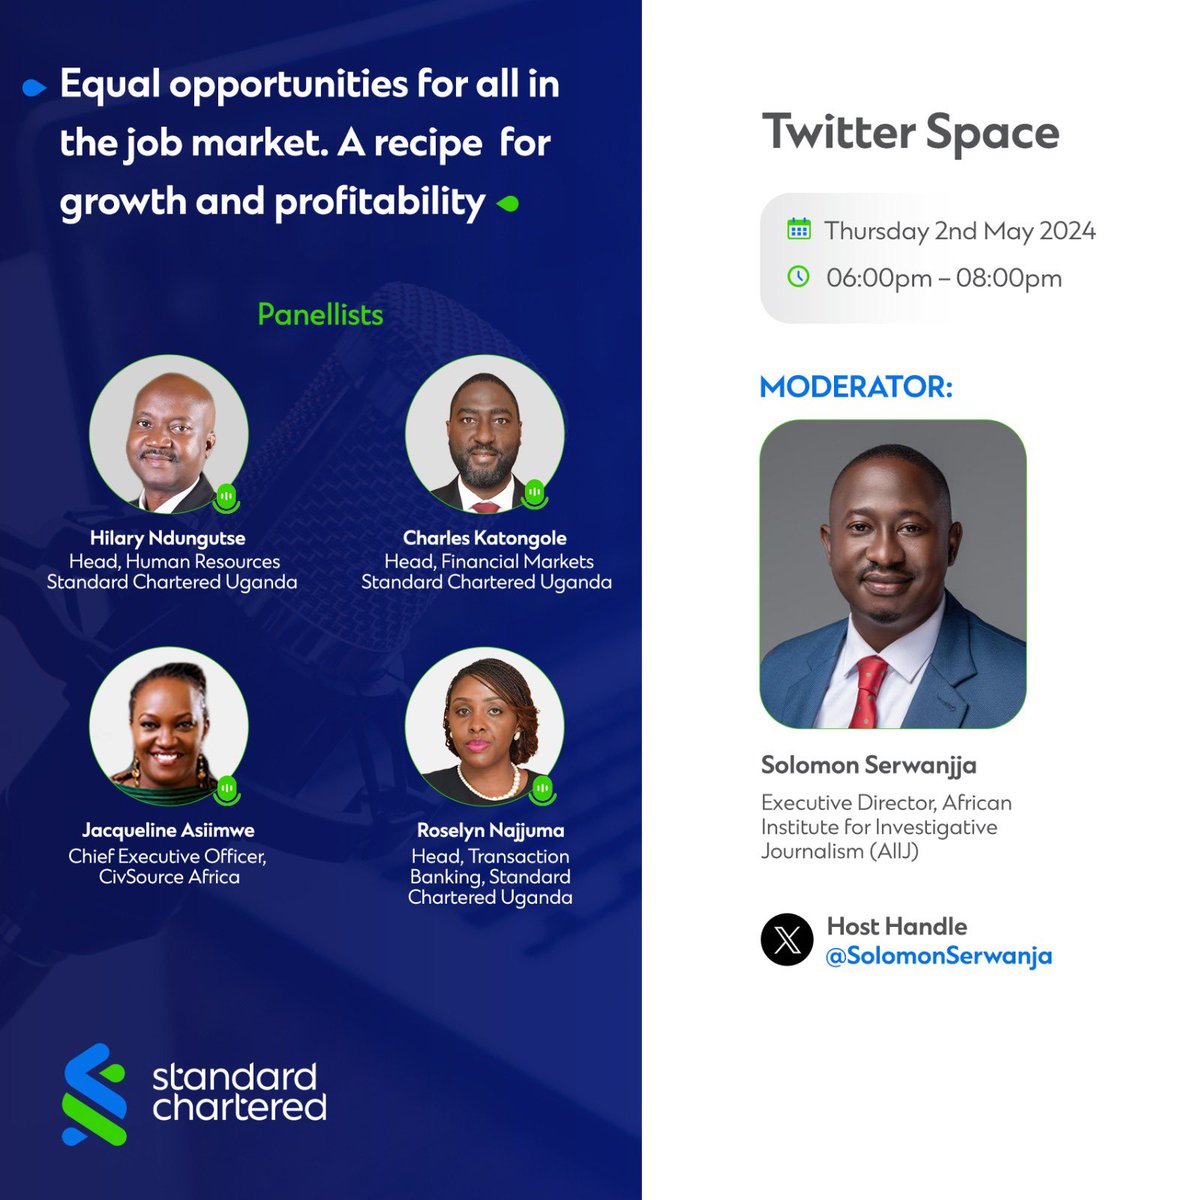 Join the conversation today on @StanChartUGA X Space hosted by @SolomonSerwanjj and be a part of the discussions for equal opportunities in the job market. Share your thoughts on inclusivity and how it drives growth and profitability! Time: 6pm-8pm #HereForGood